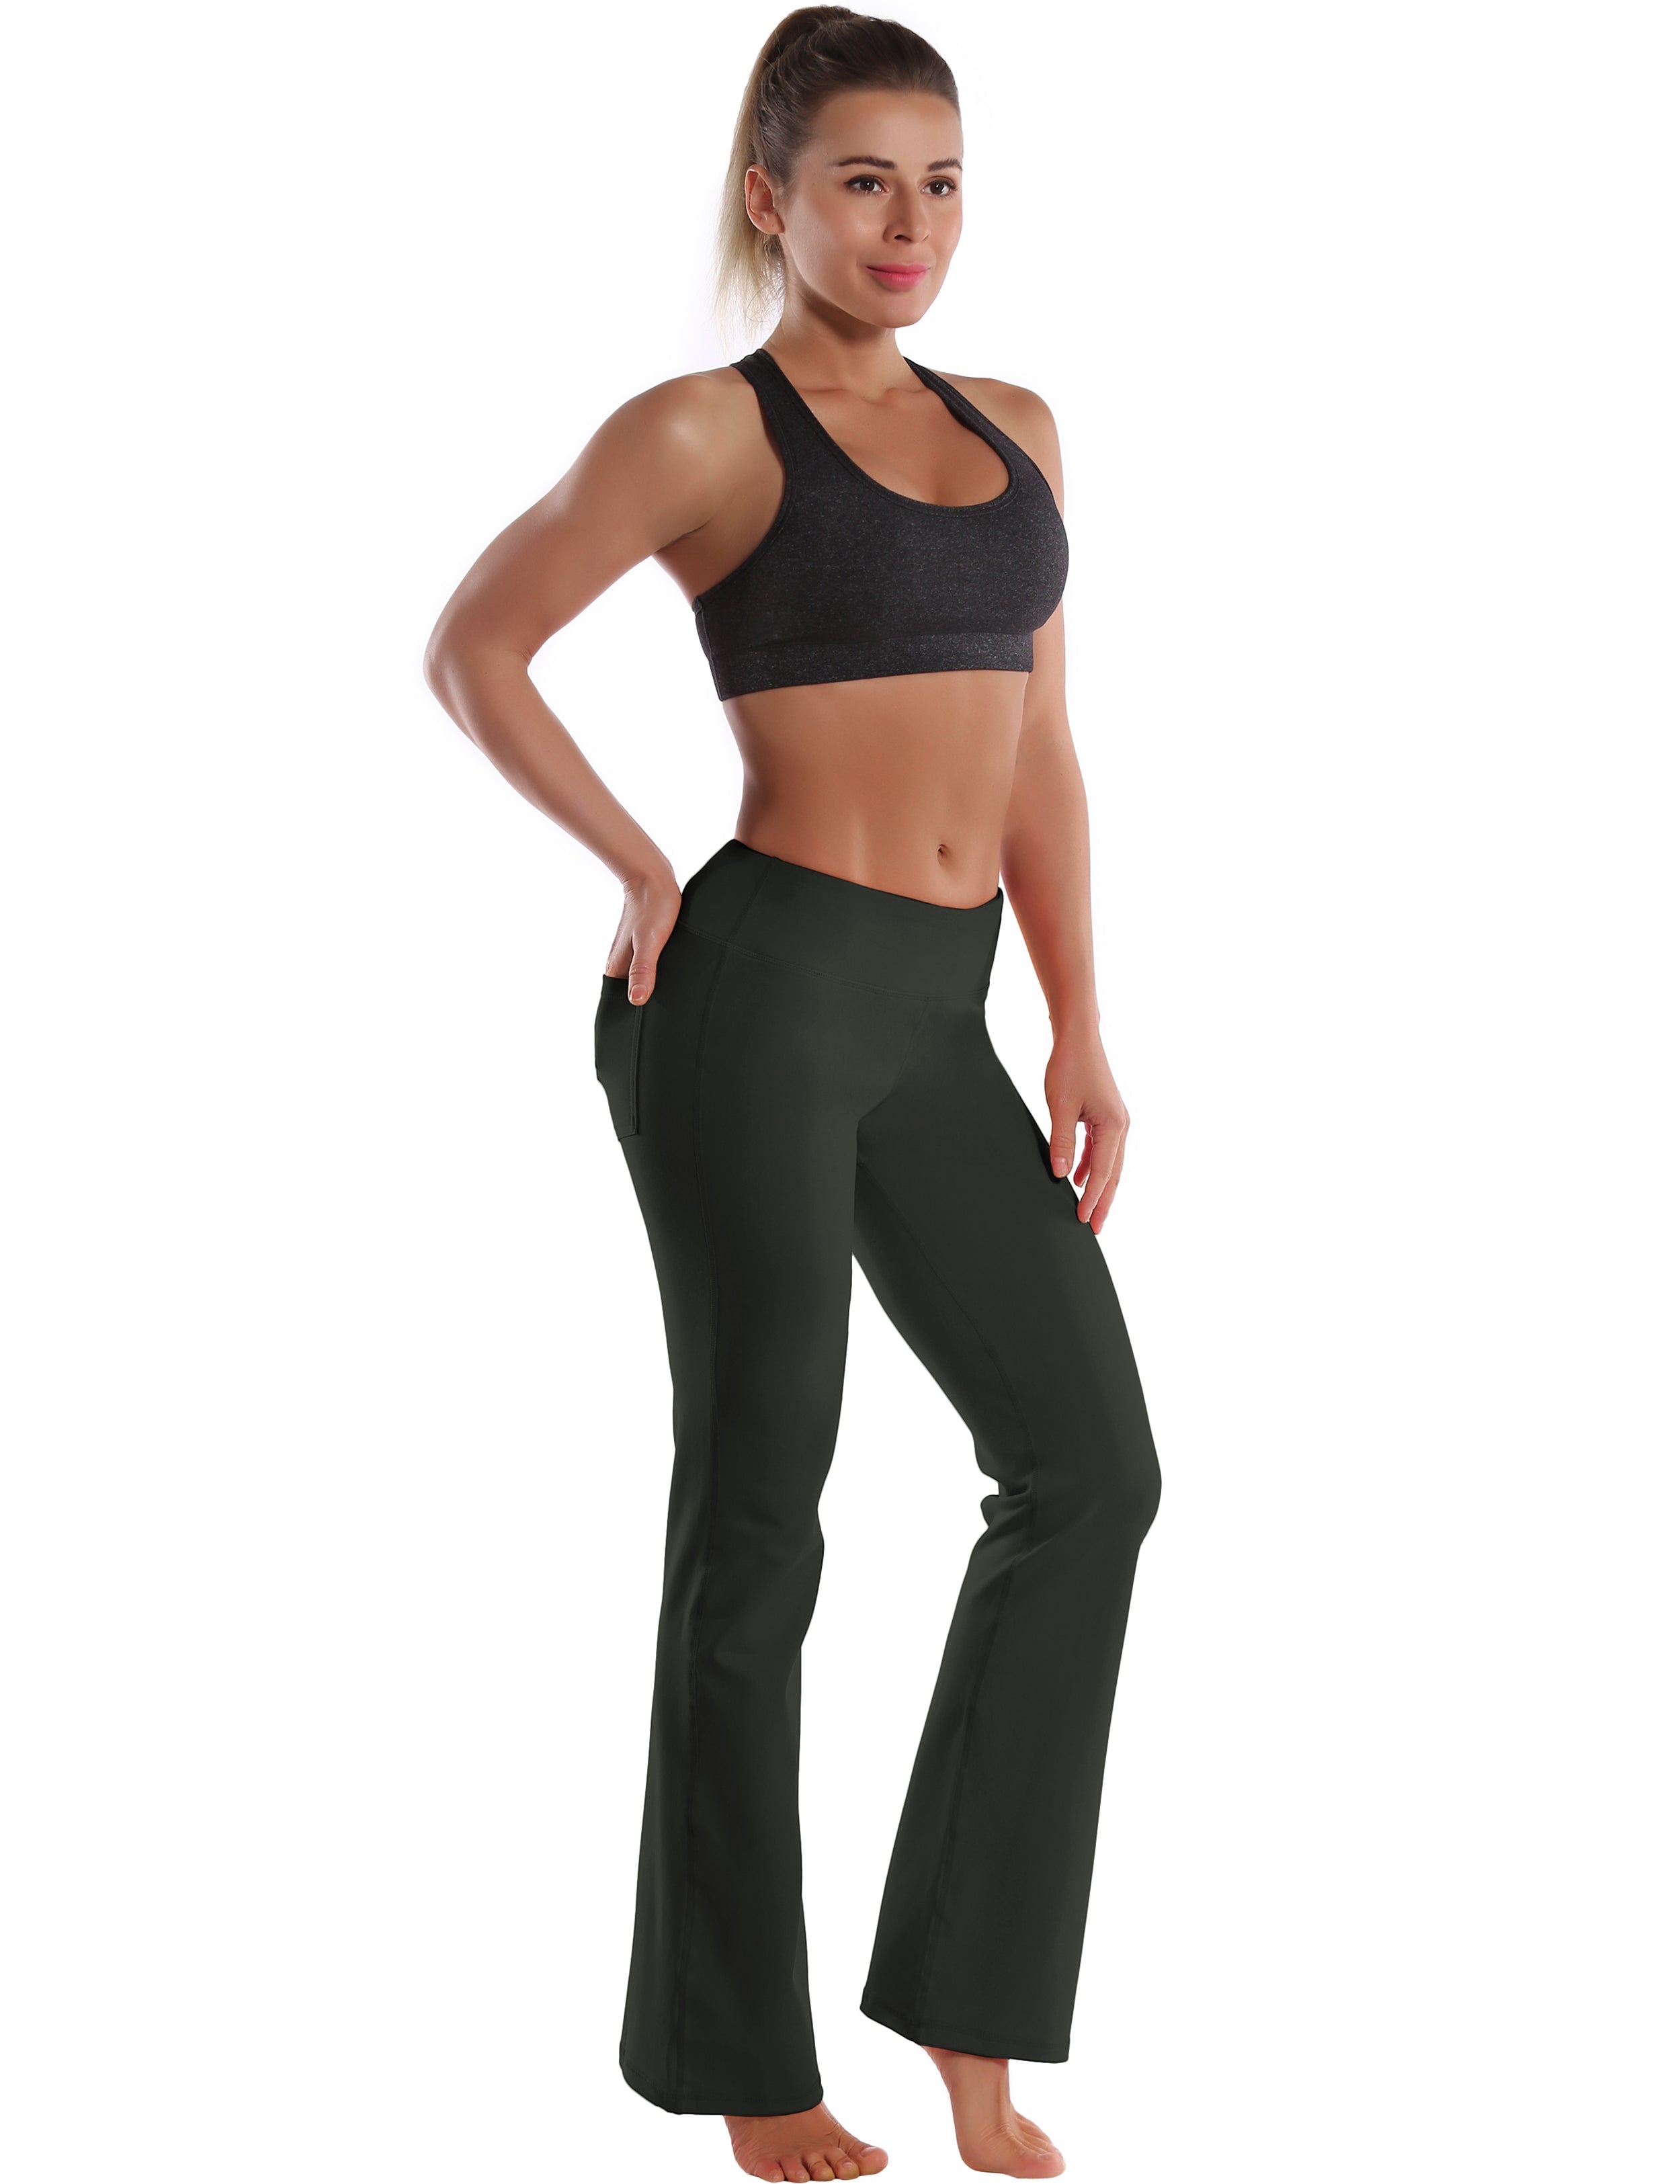 Back Pockets Bootcut Leggings olivegray 87%Nylon/13%Spandex Fabric doesn't attract lint easily 4-way stretch No see-through Moisture-wicking Inner pocket Four lengths